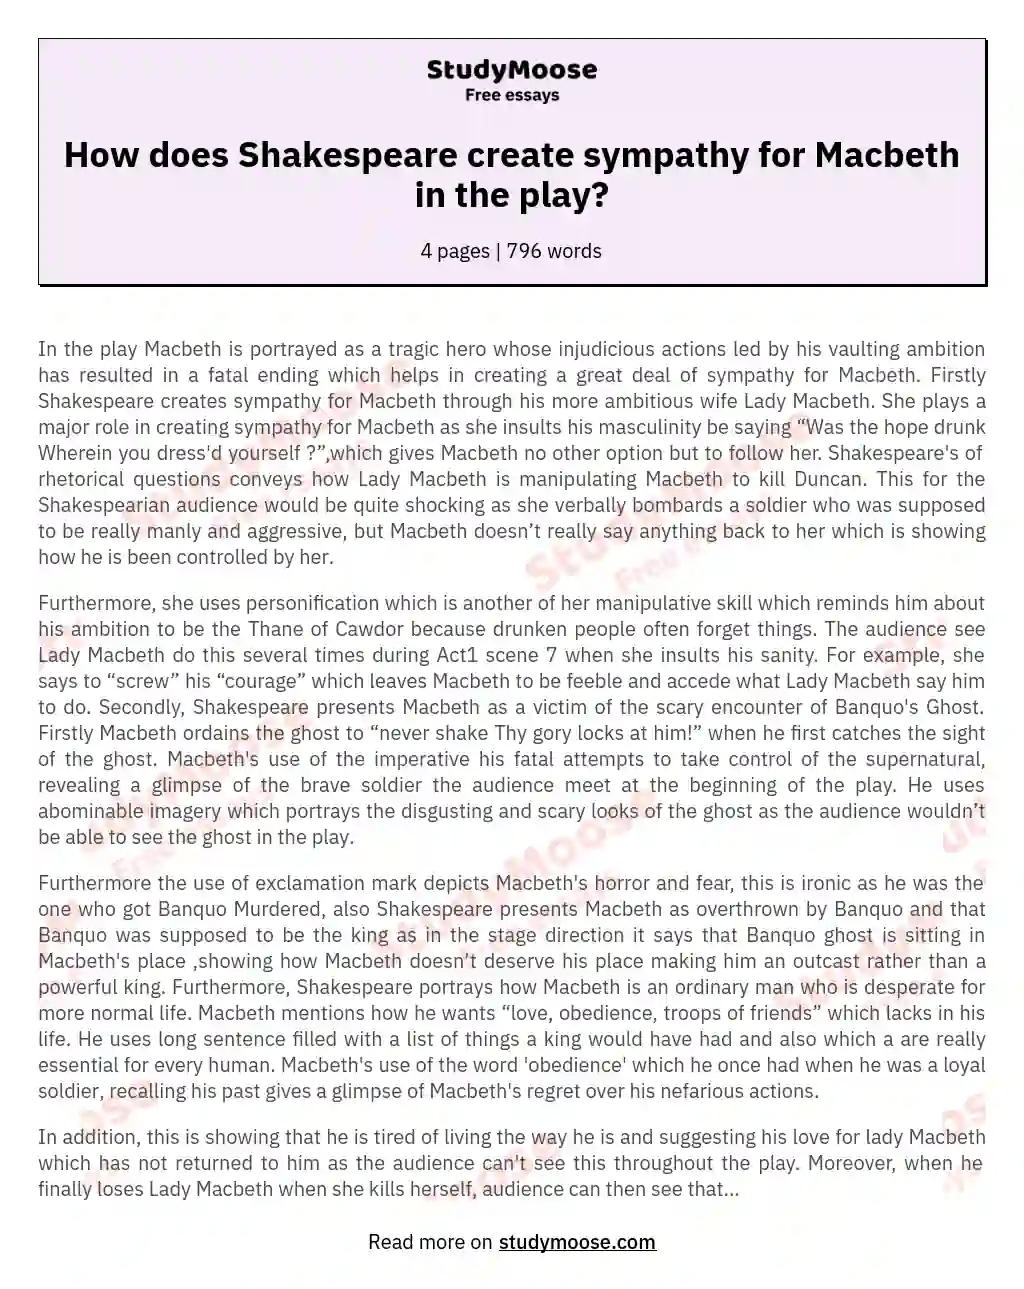 How does Shakespeare create sympathy for Macbeth in the play? essay